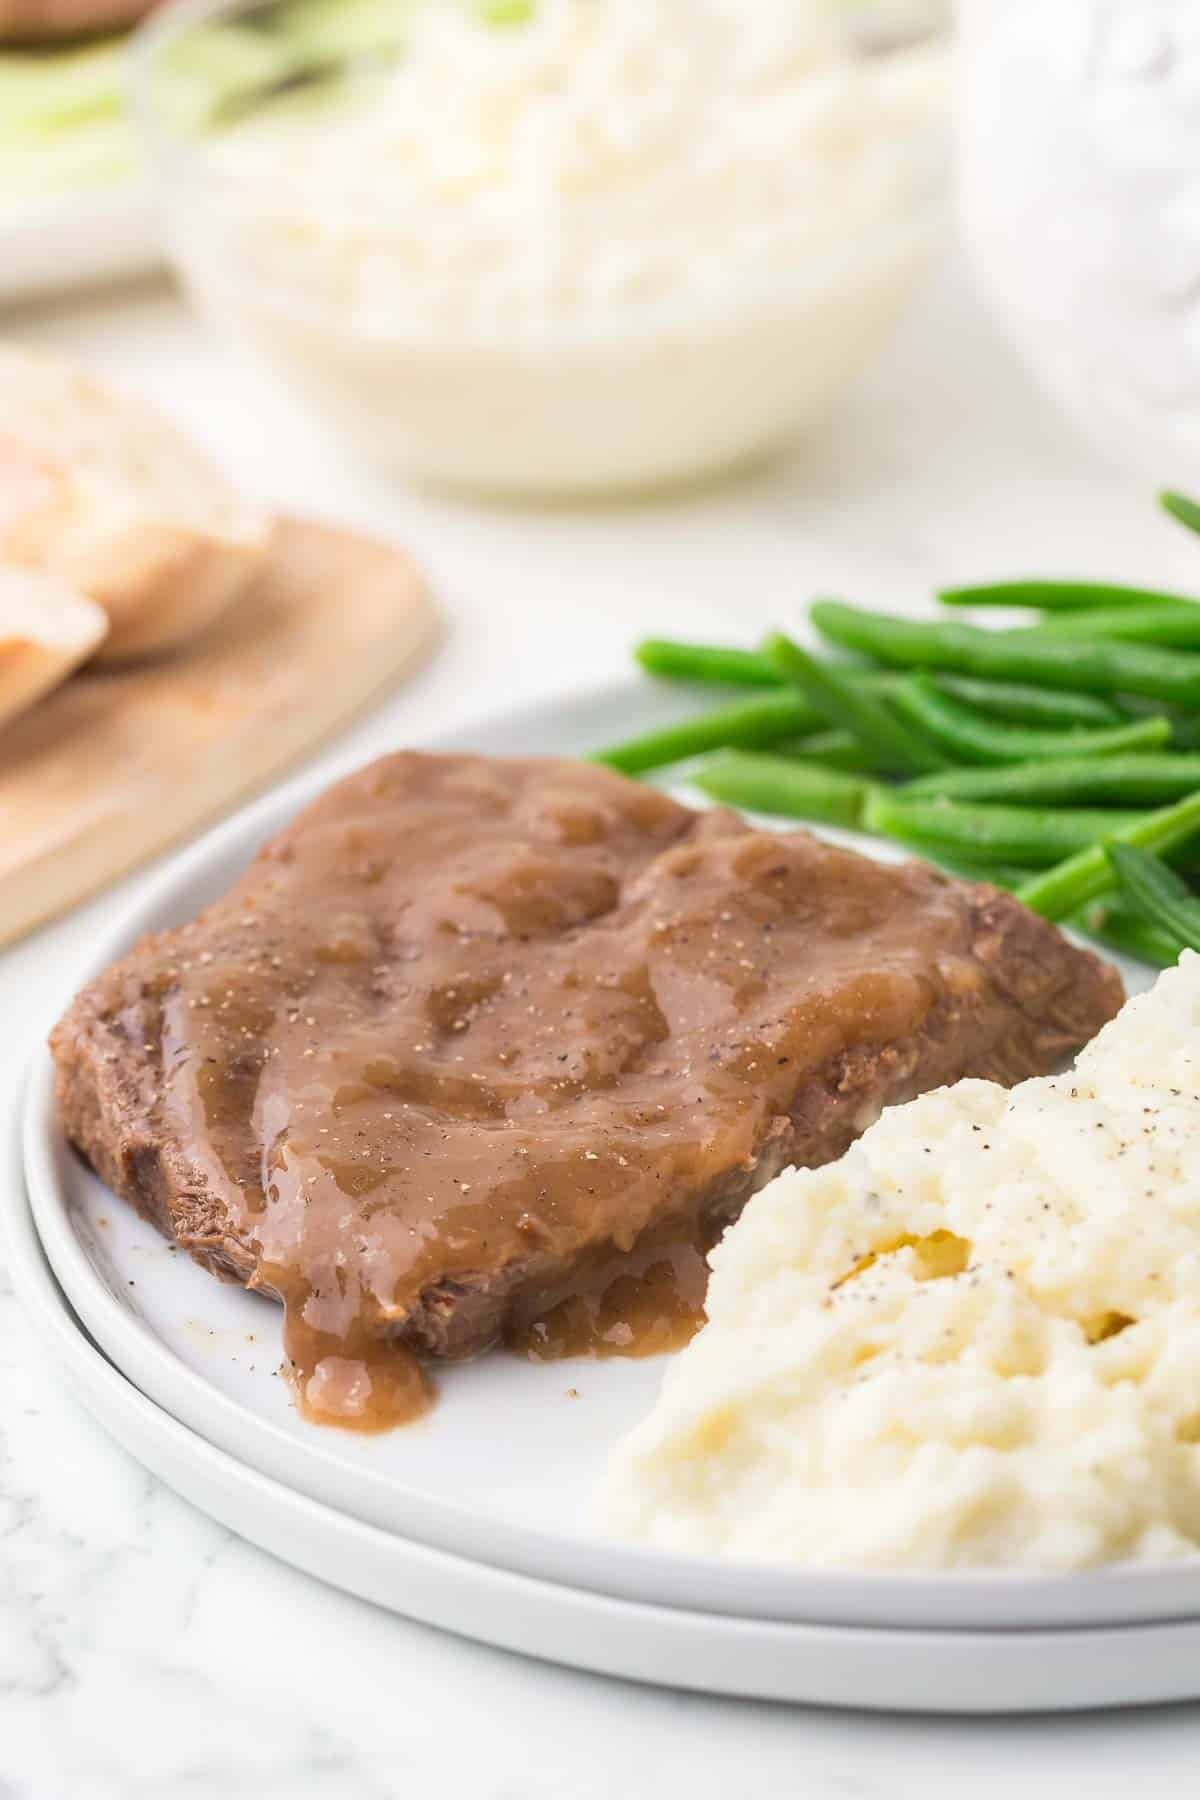 side view of plate of steak with brown gravy mashed potatoes green beans and bread on the side